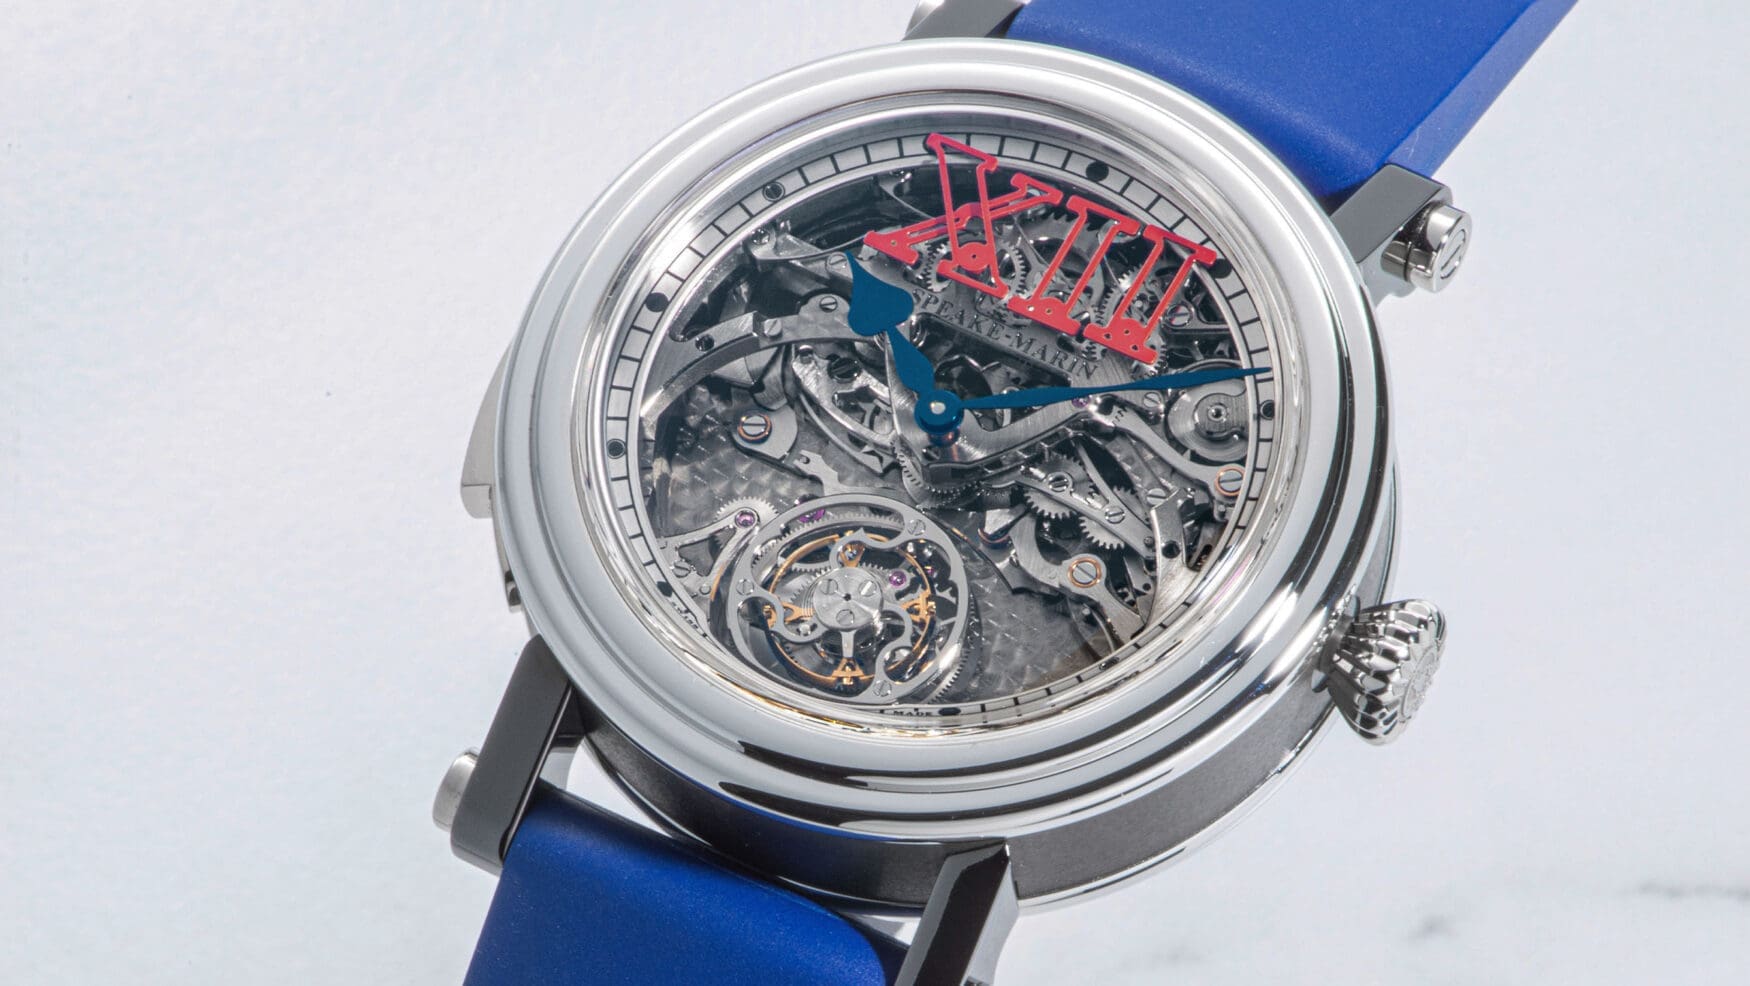 Speake-Marin’s Minute Repeater Carillon is a modern take on the sonnerie watch